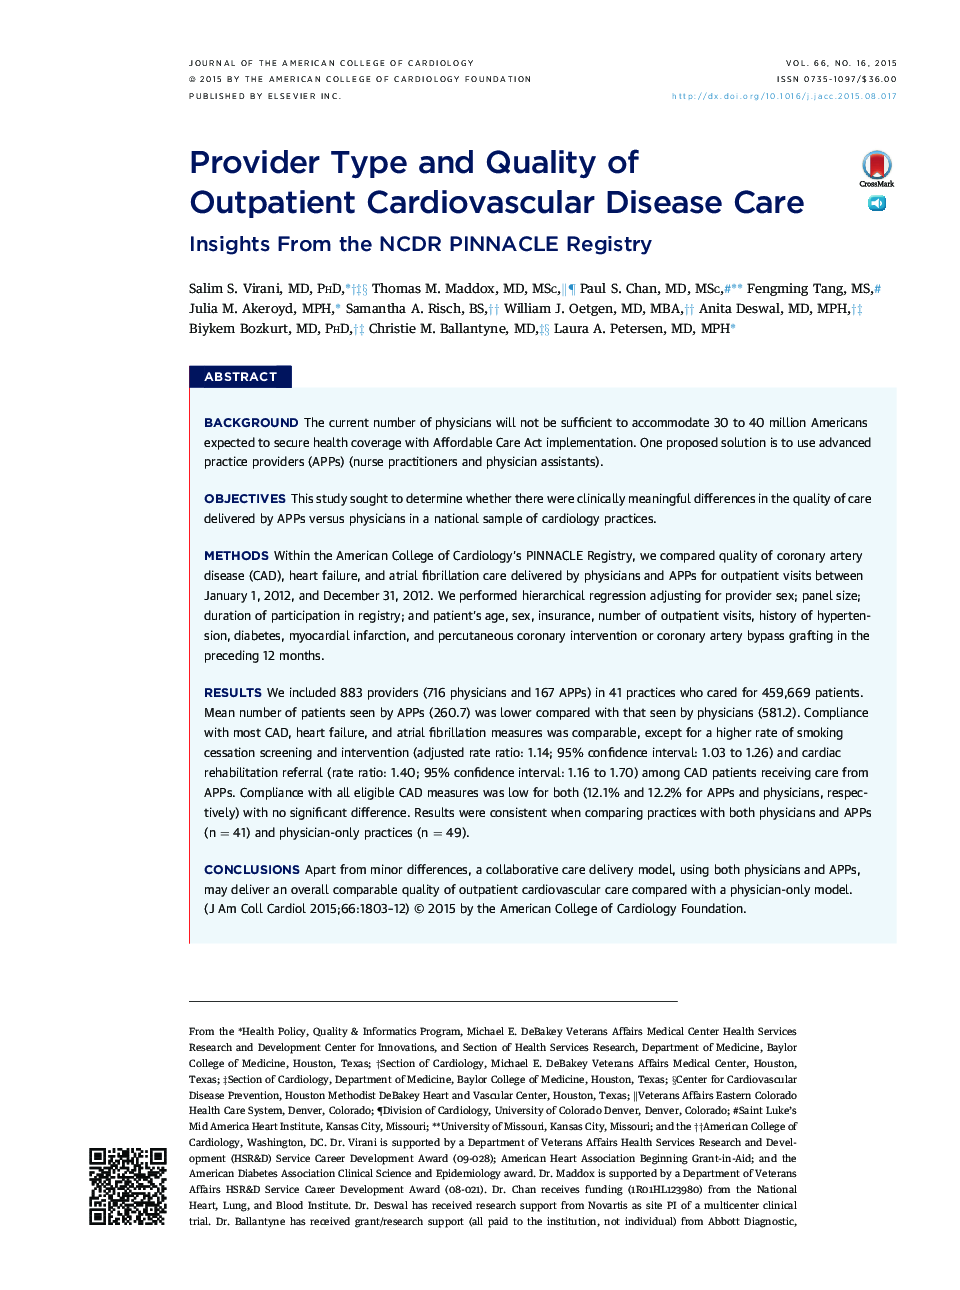 Provider Type and Quality of Outpatient Cardiovascular Disease Care: Insights From the NCDR PINNACLE Registry